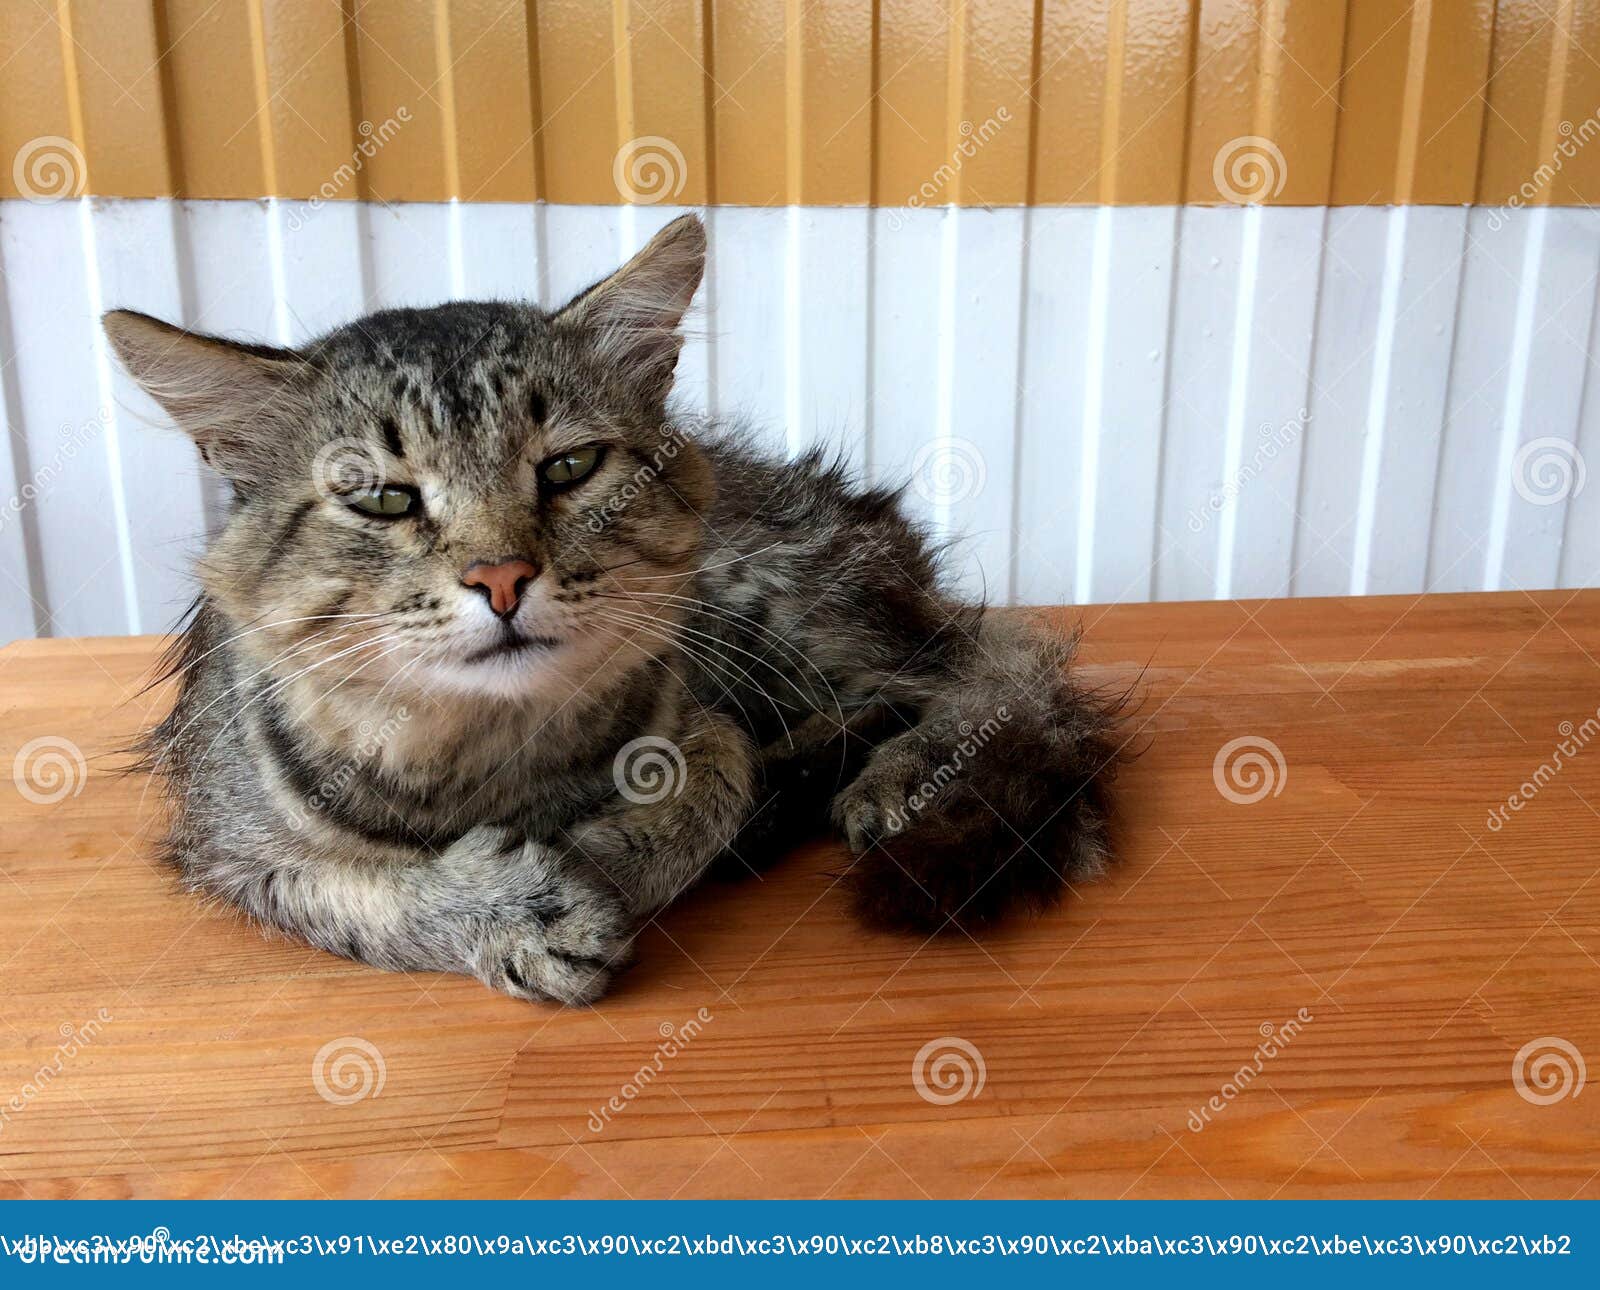 Sad Tired Gray Cat Sitting On A Wooden Bench Stock Image Image of